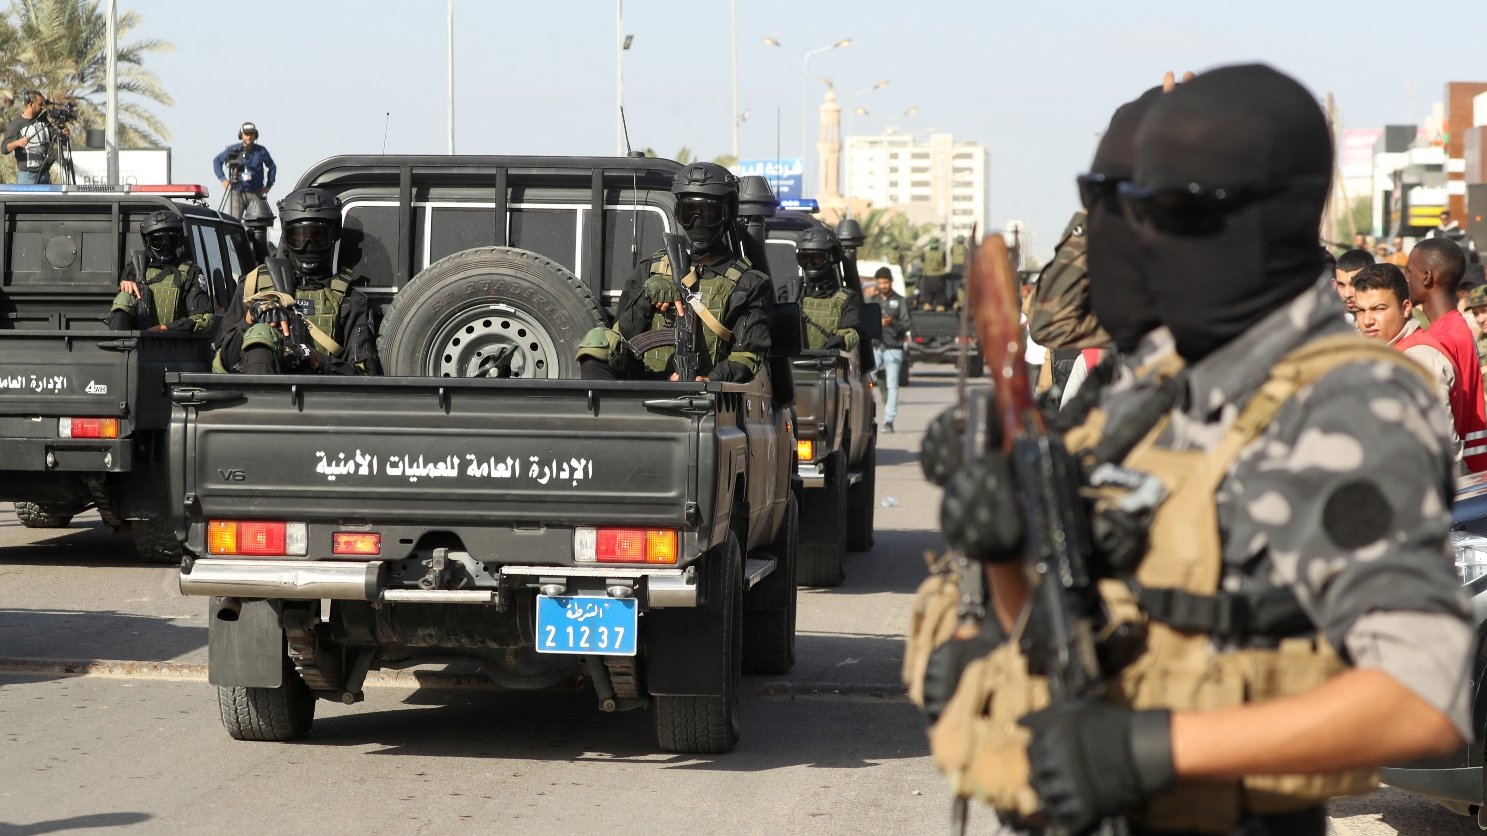 Libyan security forces affiliated with Tripoli-based interim Prime Minister Abdelhamid Dbeibah in the northwestern city of Misrata, on 17 December 2022